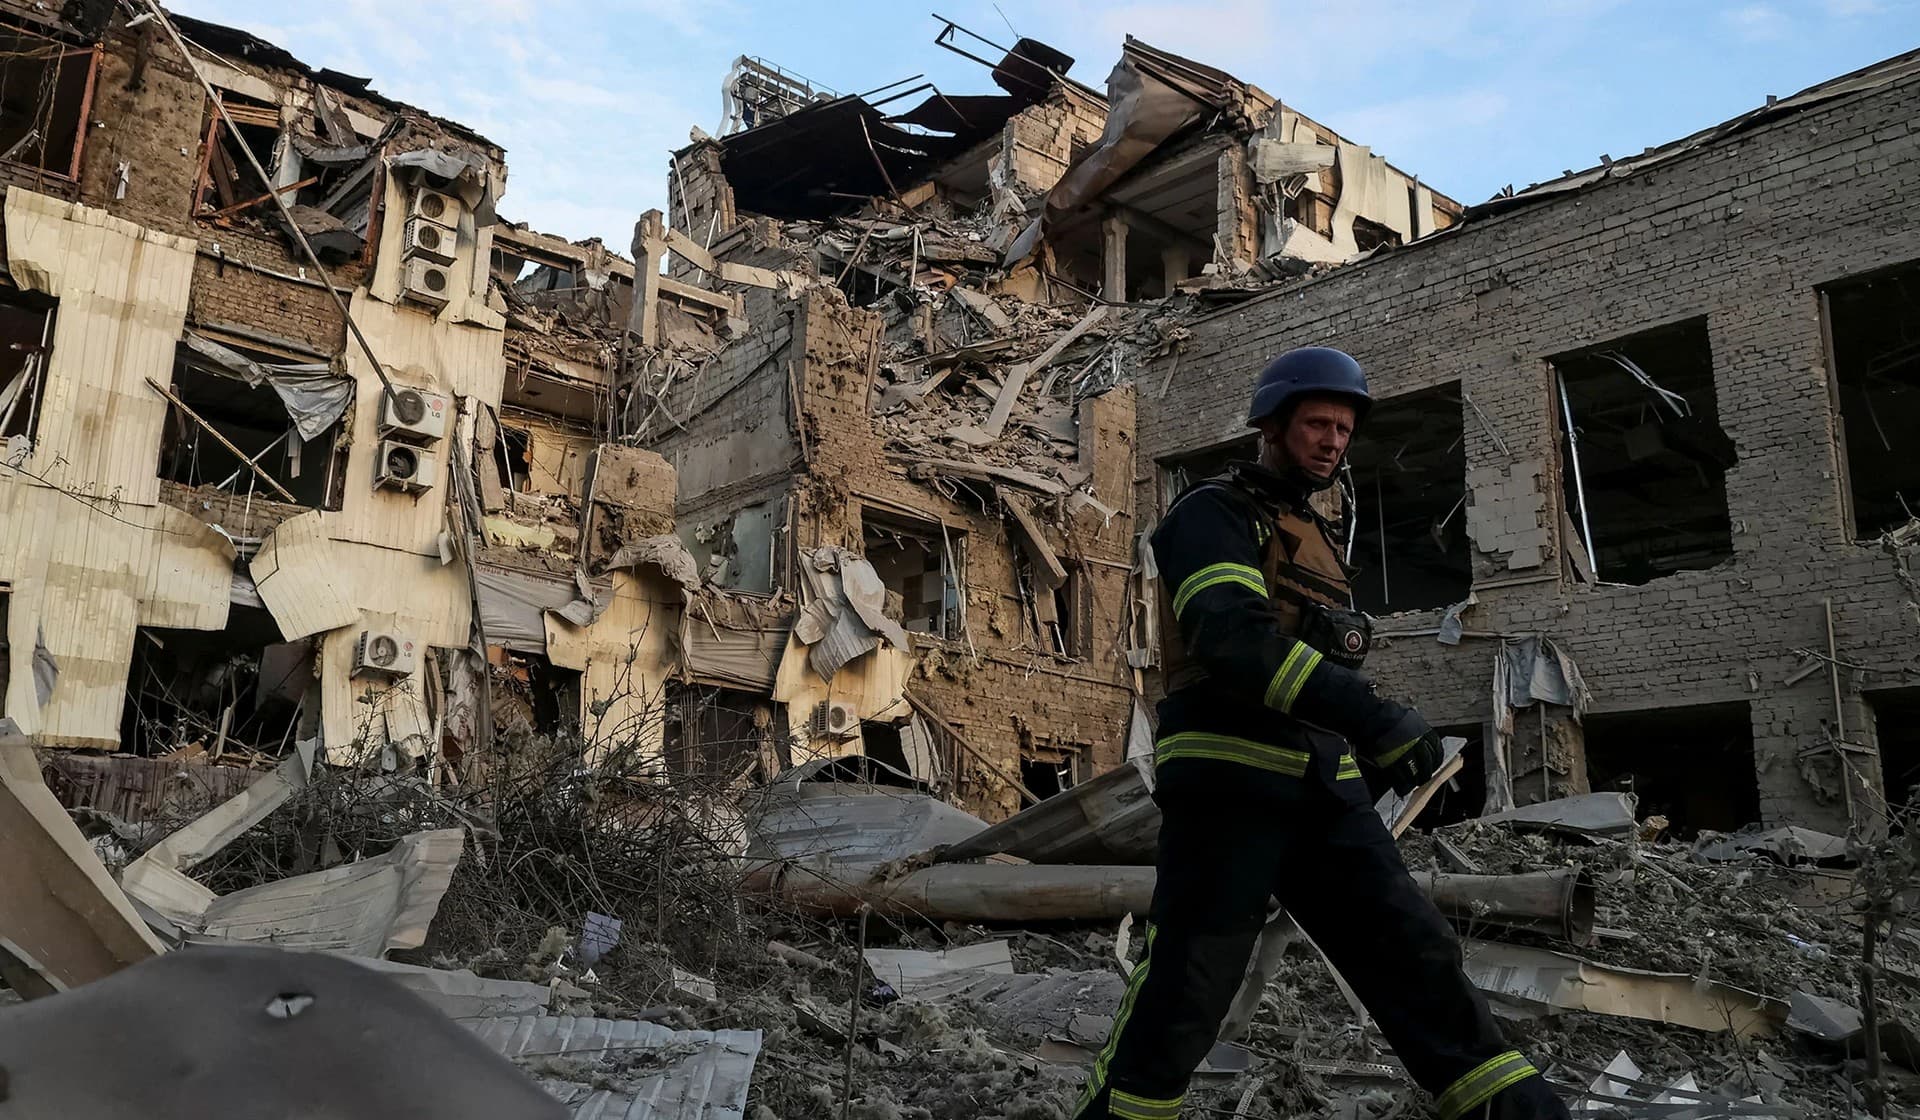 A rescuer works at a site of a building heavily damaged by a Russian missile strike in Kramatorsk